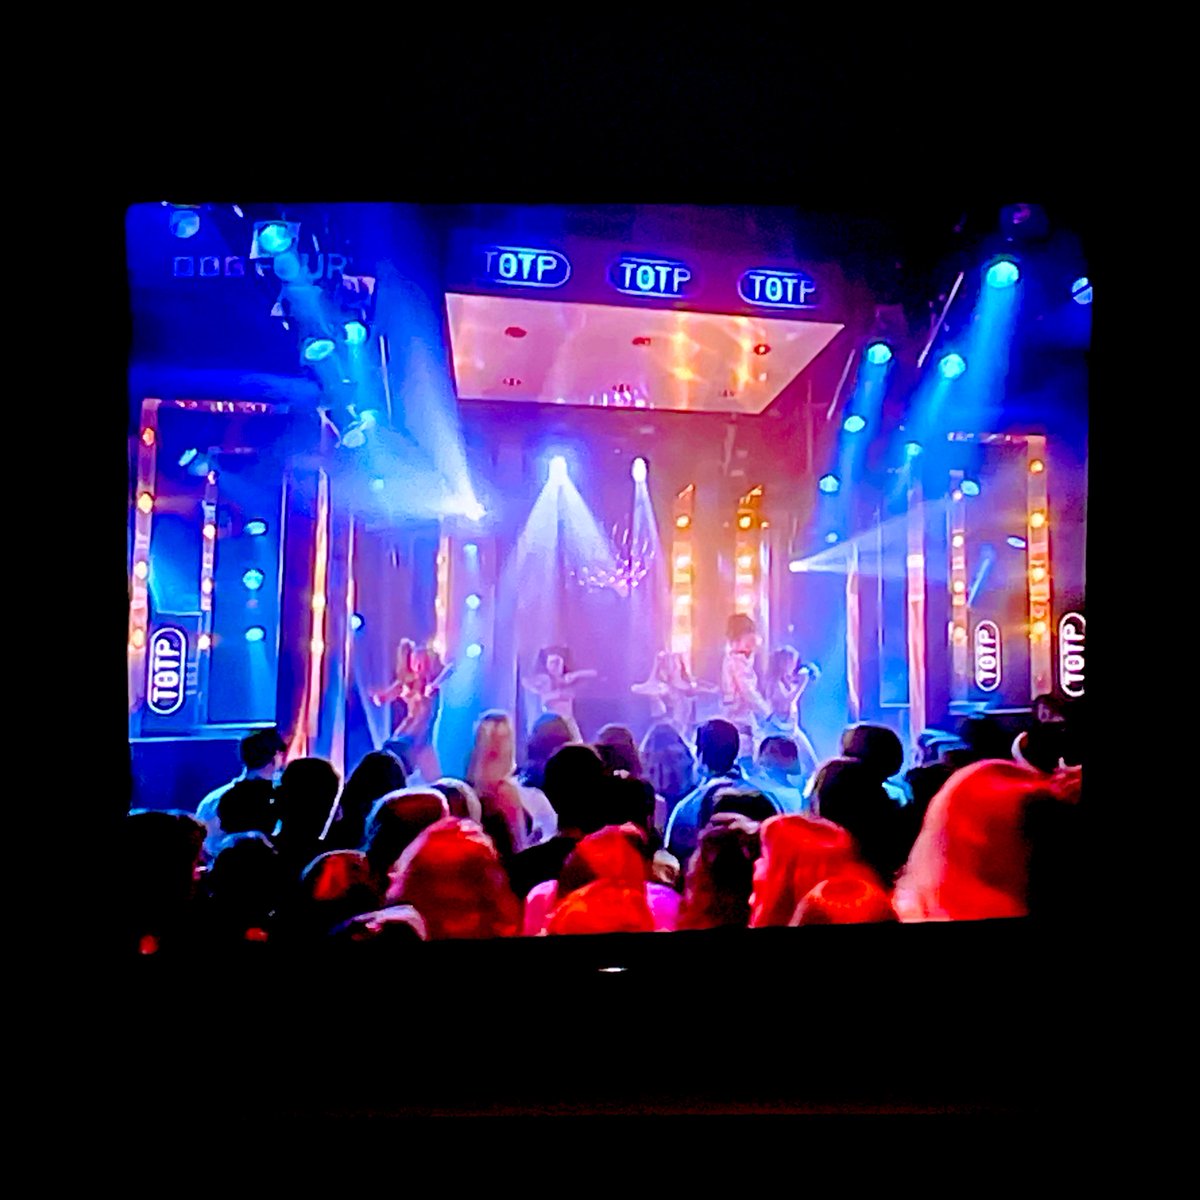 Top of the Pops 1995. I know every song and they’re still better than the crap of today! The 90s were such a great time to be alive! 🤩